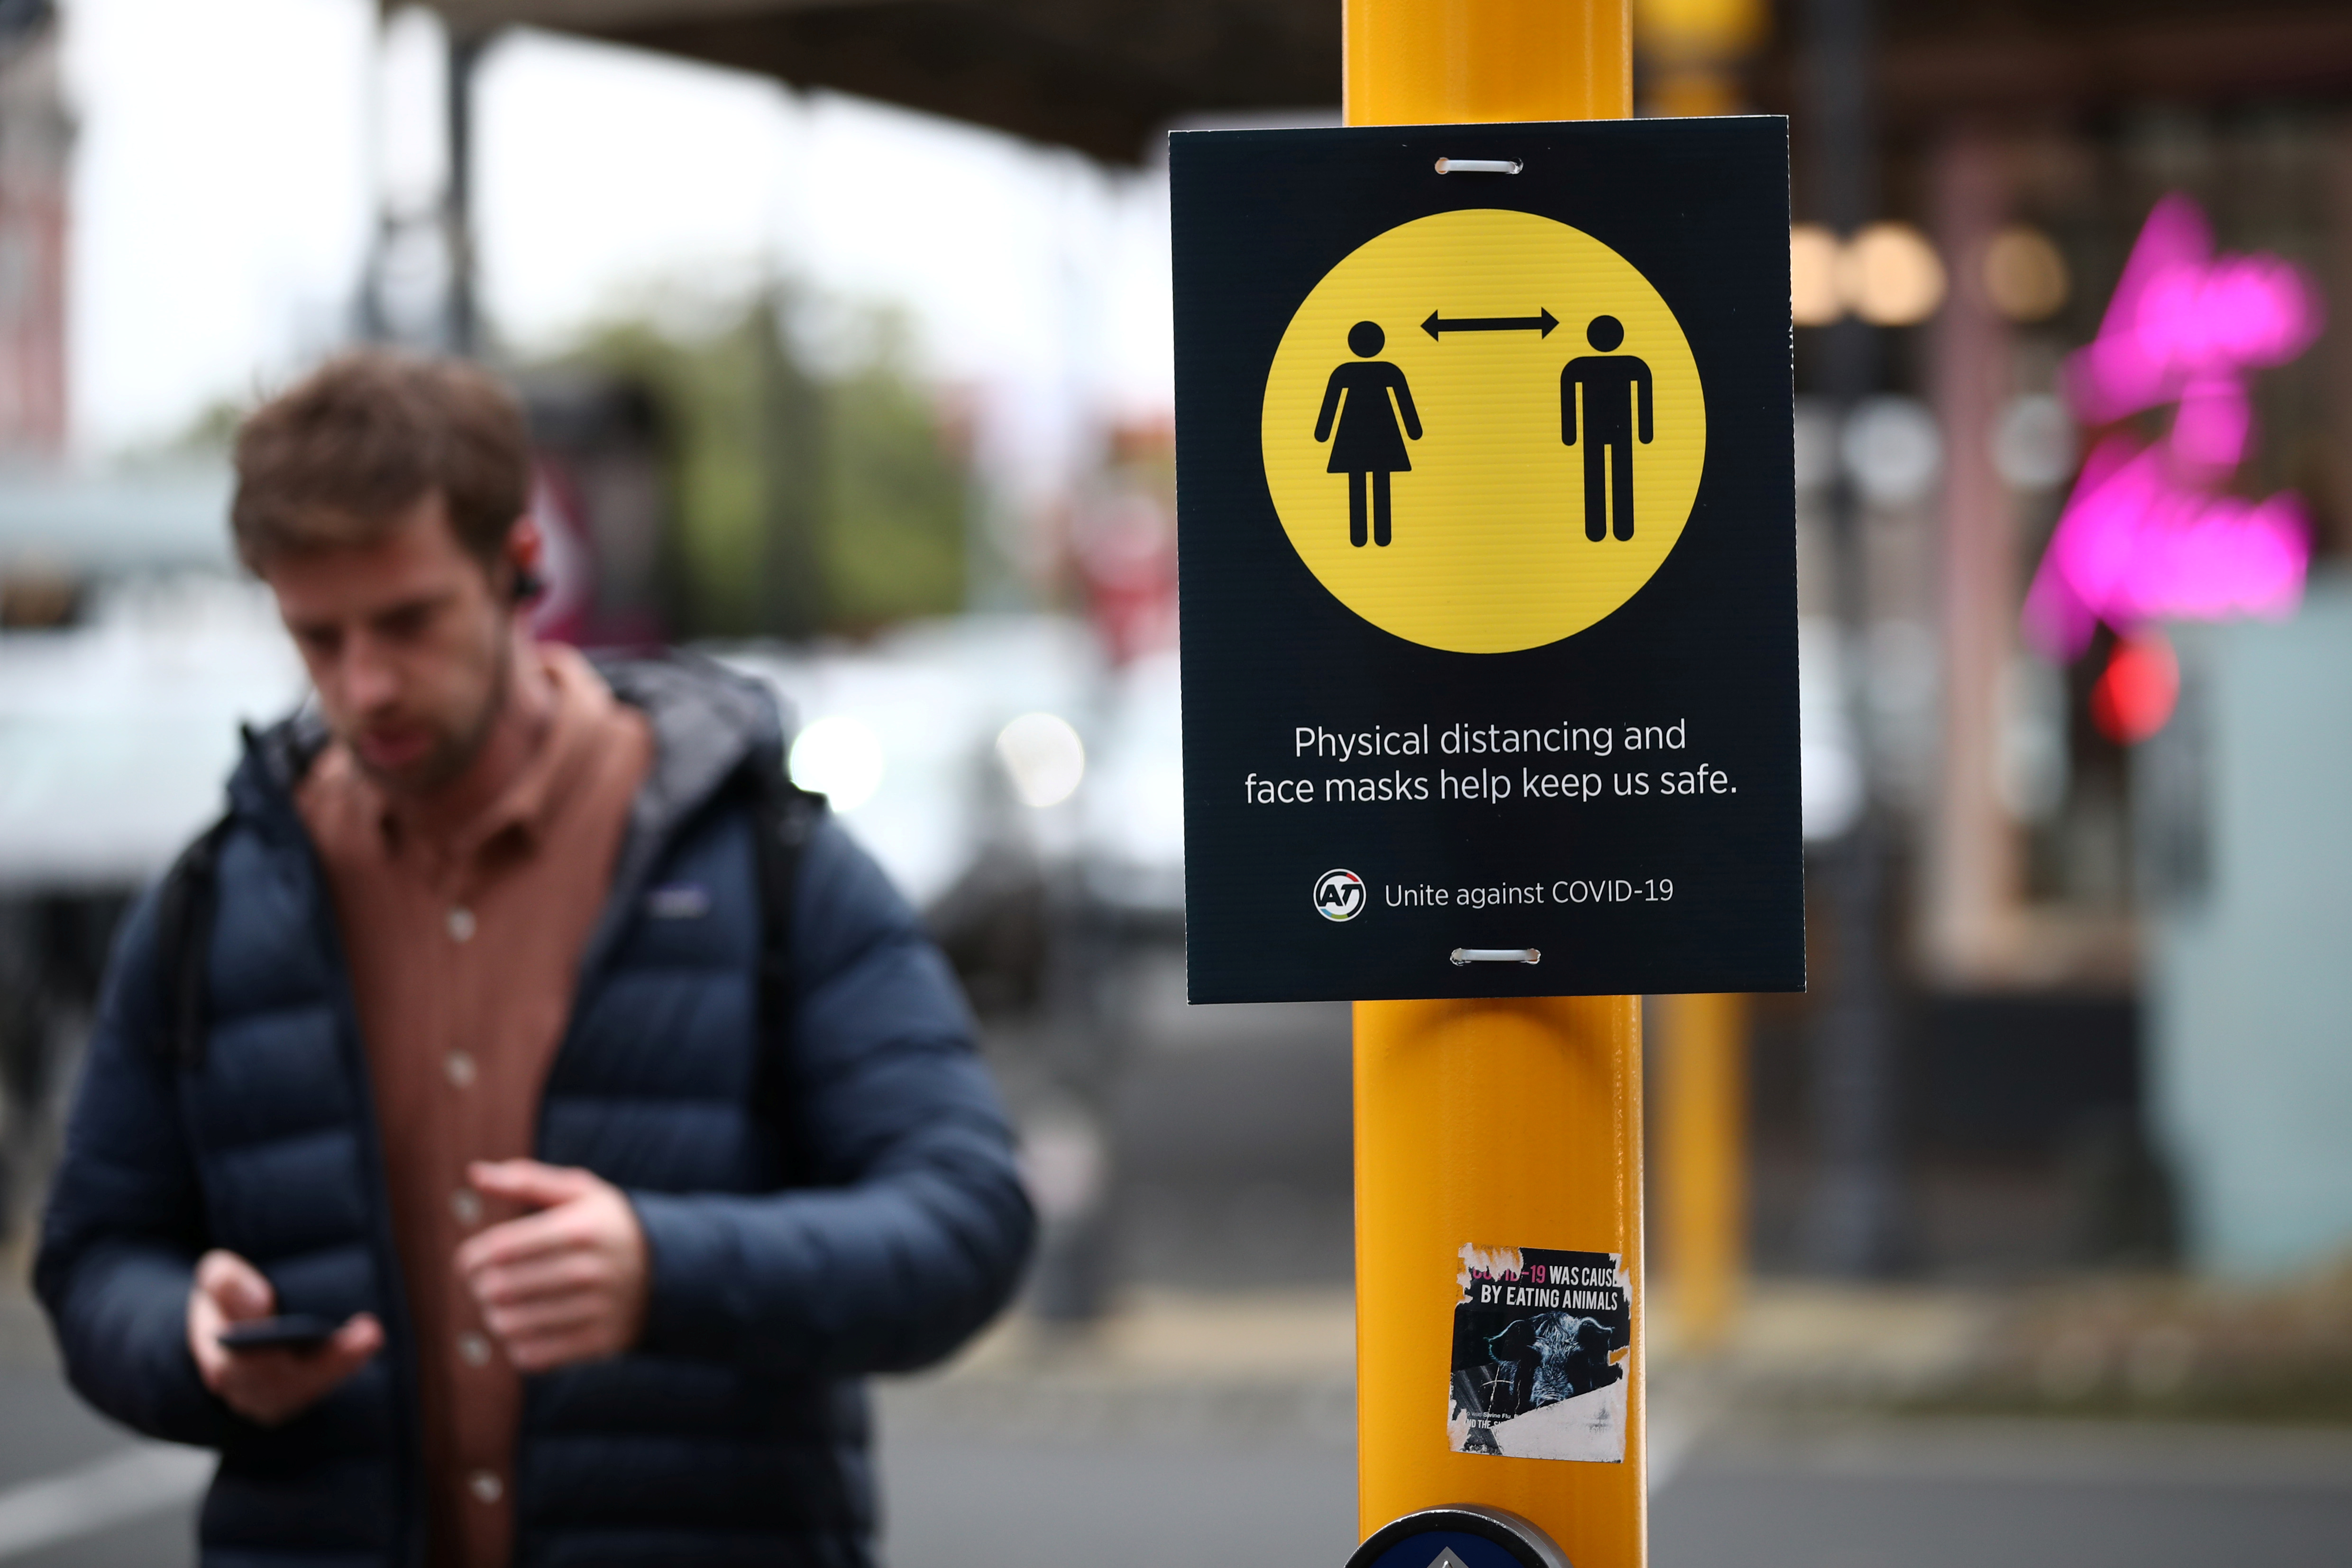 New Zealand's COVID-19 safety measure mandating masks on public transport takes effect in Auckland